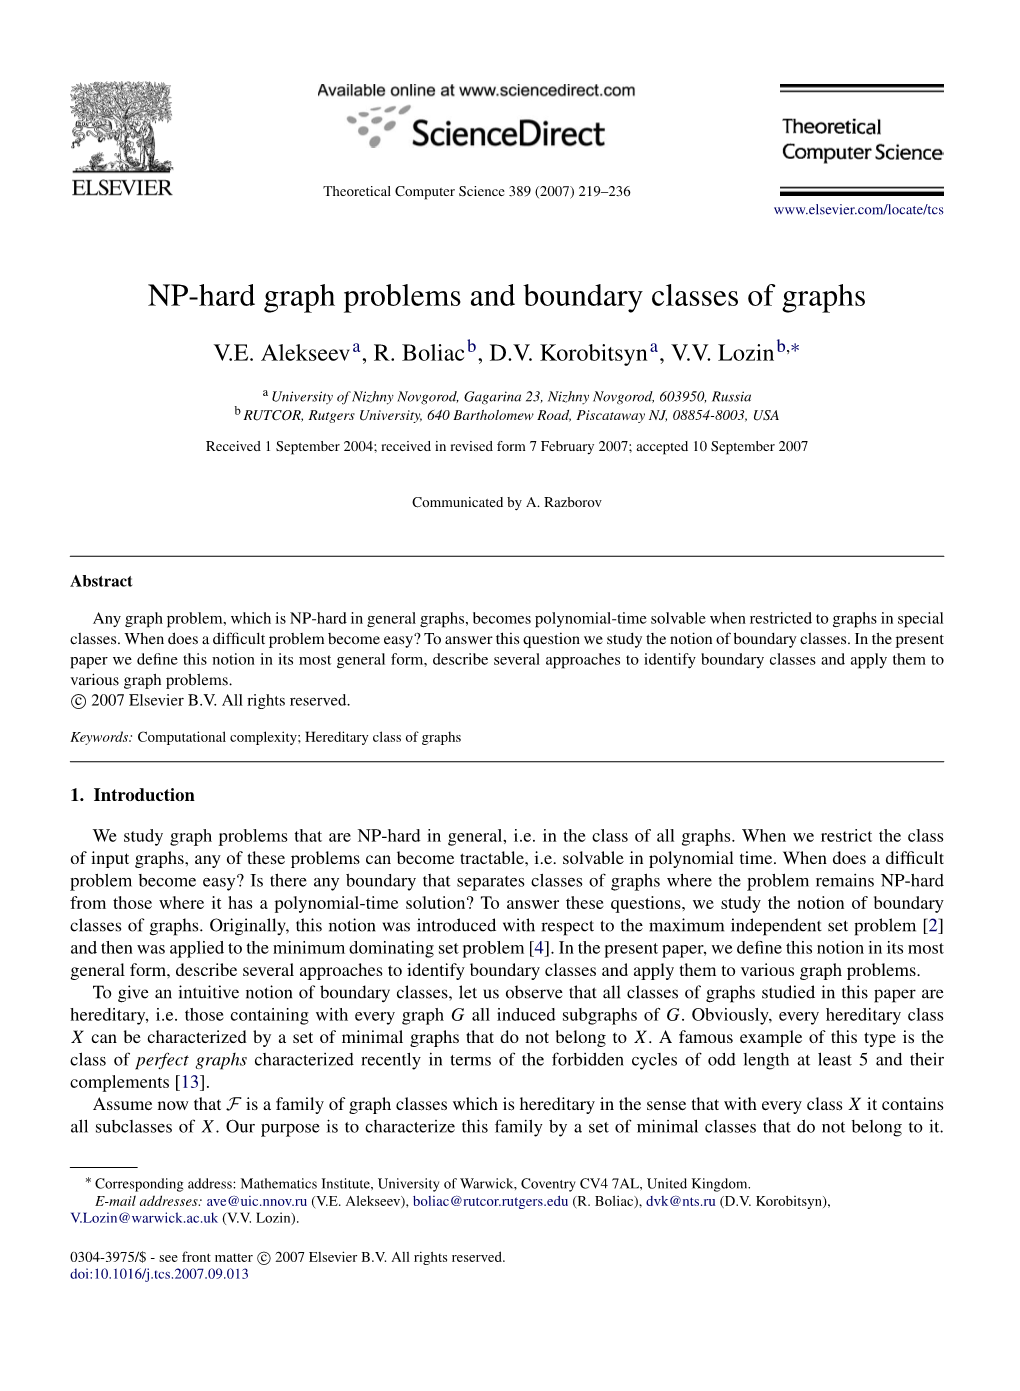 NP-Hard Graph Problems and Boundary Classes of Graphs